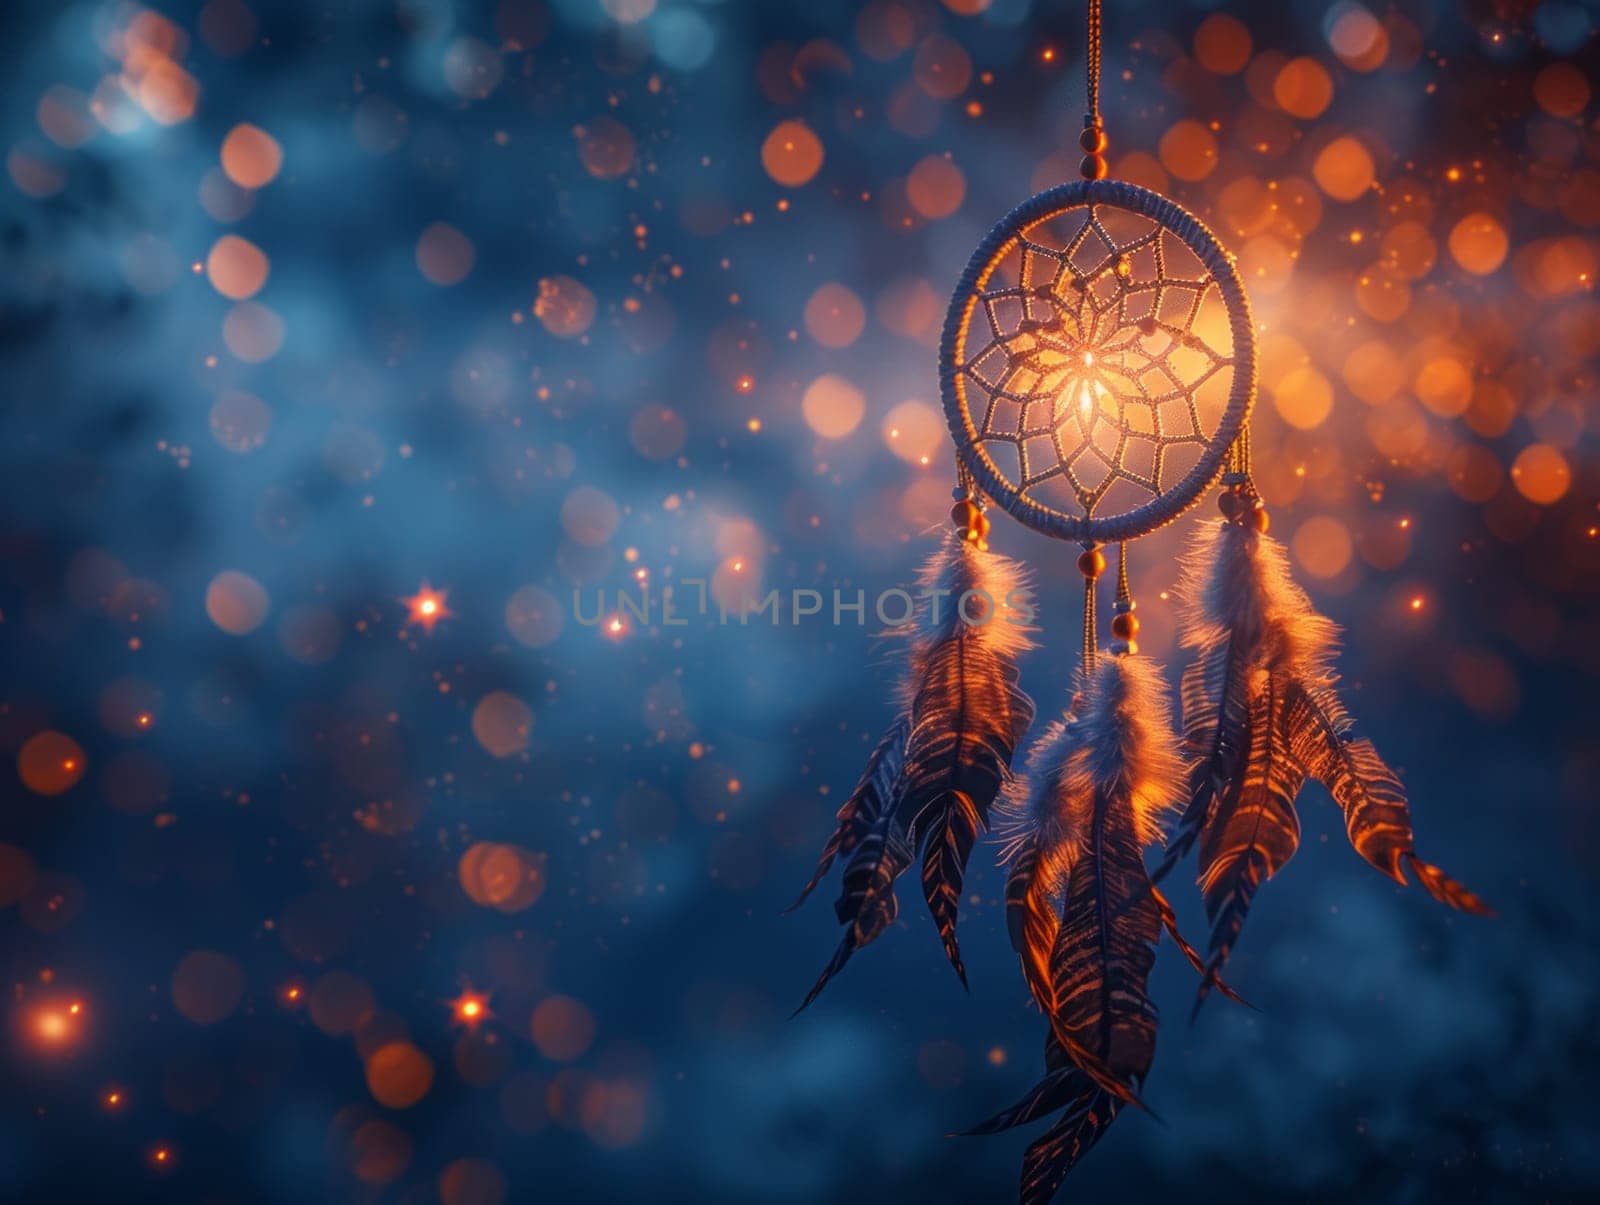 A dream catcher is suspended on a string, with soft lights glowing in the background, creating a magical and mystical ambiance by but_photo